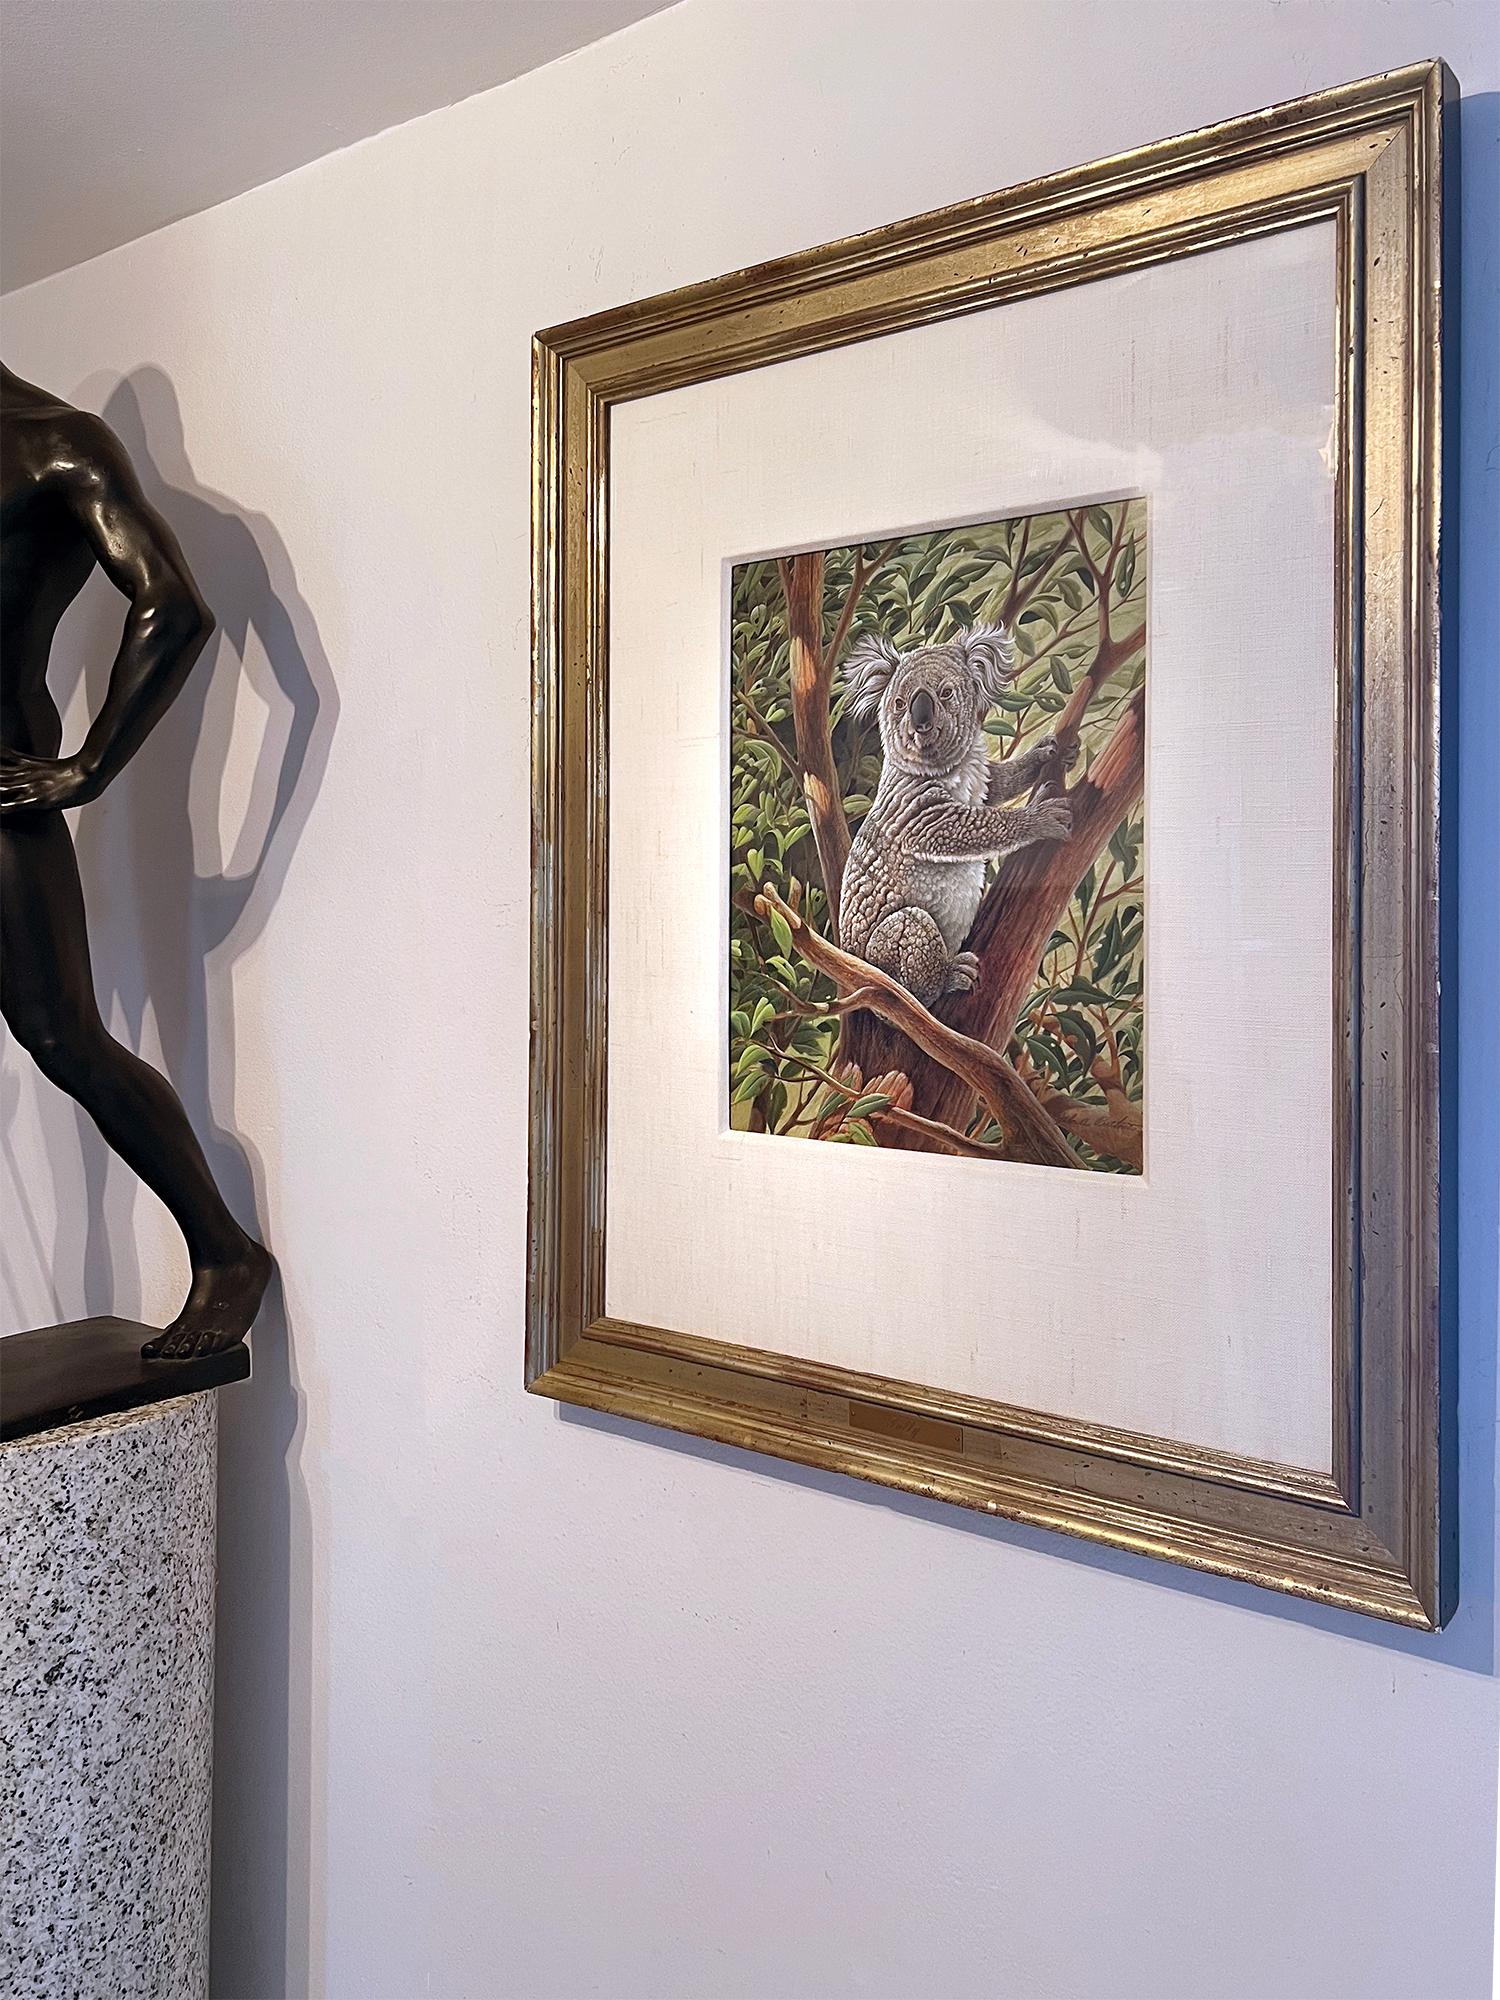 John Ruthven is recognized as the “20th-century Audubon.  In this very detailed and meticulously rendered work the artist depicts a Koala in an iconic and proud pose and a Photorealistic manner. Framed size 28.5  x 23.5 